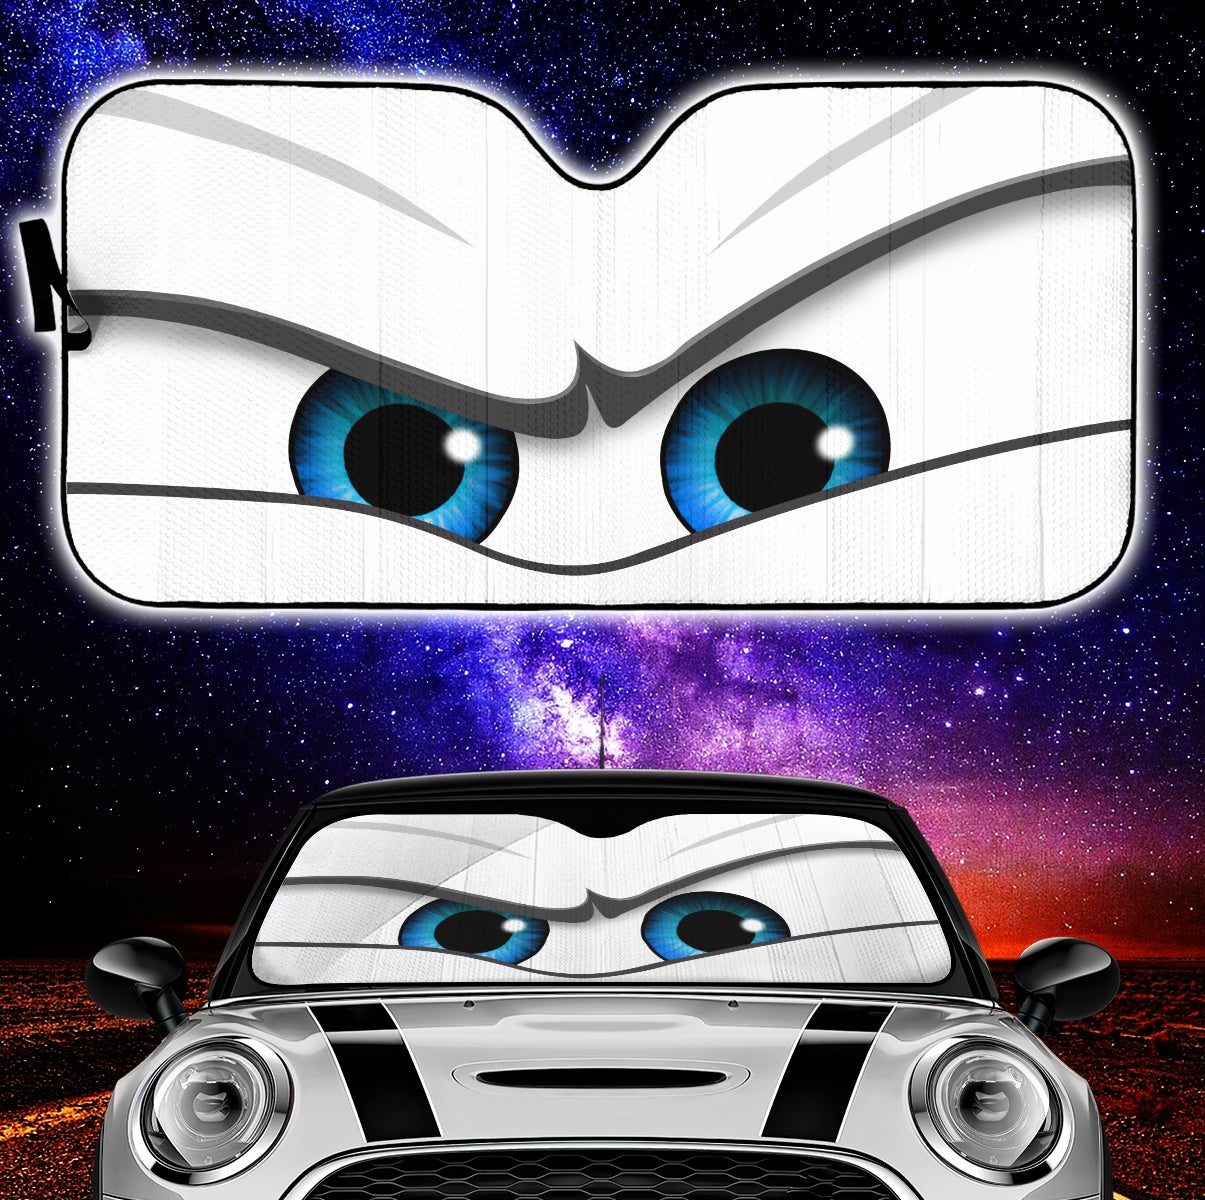 White Angry Eyes Auto Sun Shades